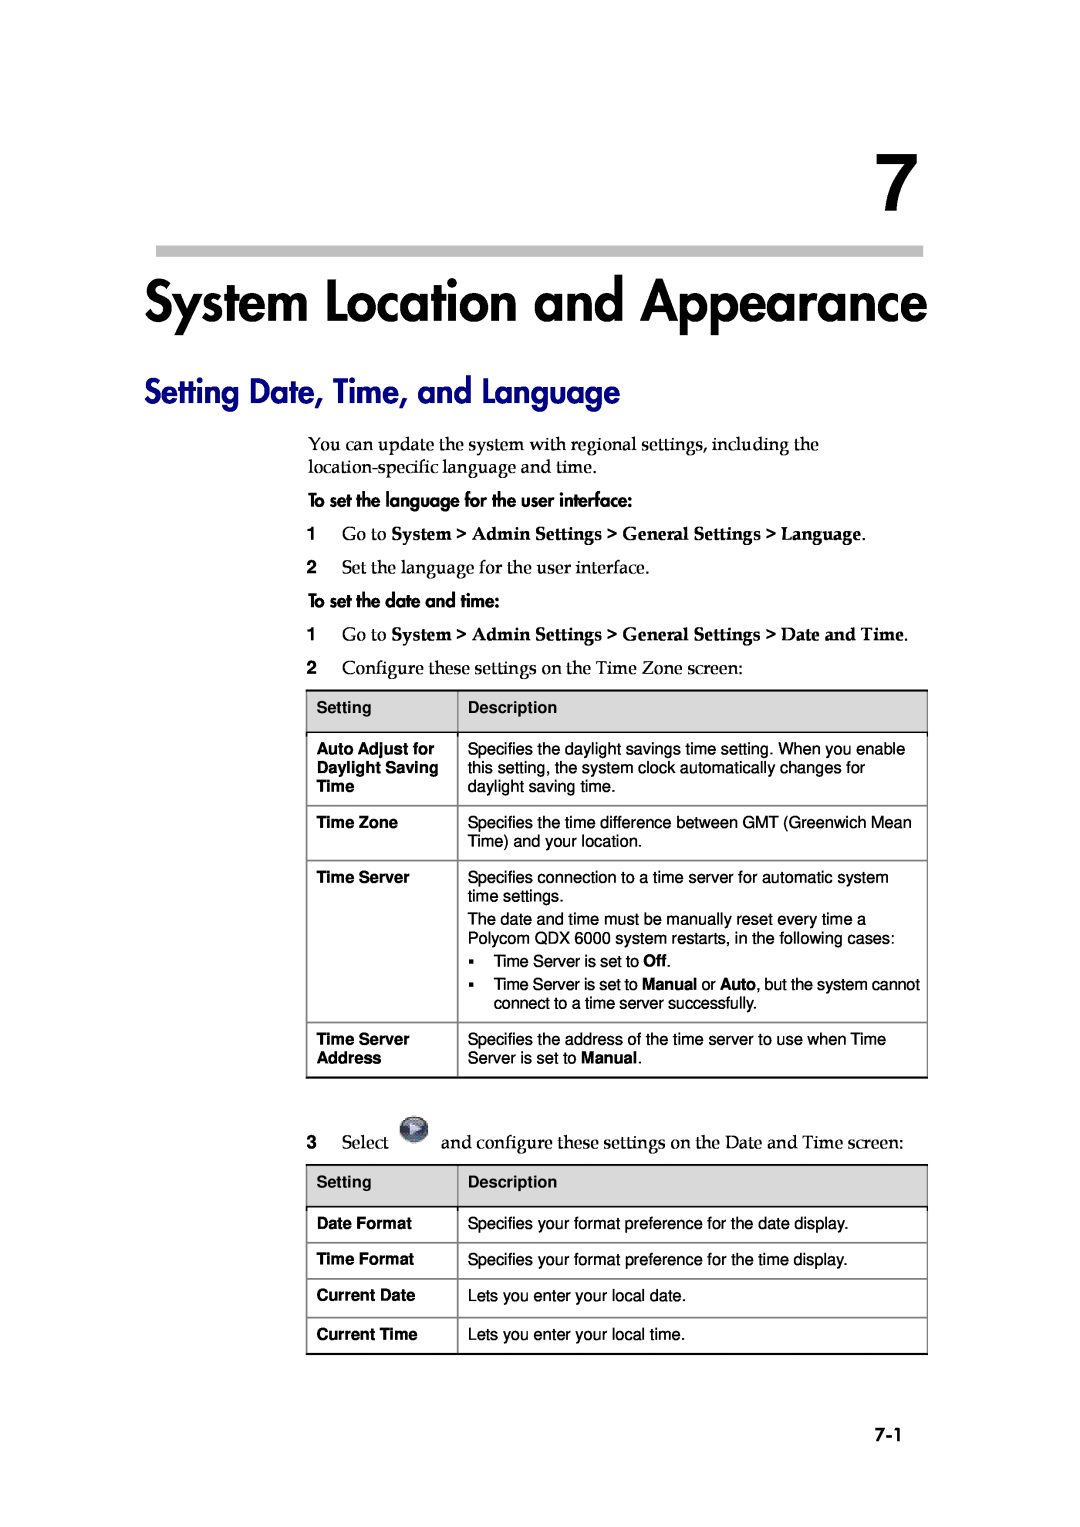 Polycom 6000 System Location and Appearance, Setting Date, Time, and Language, To set the language for the user interface 